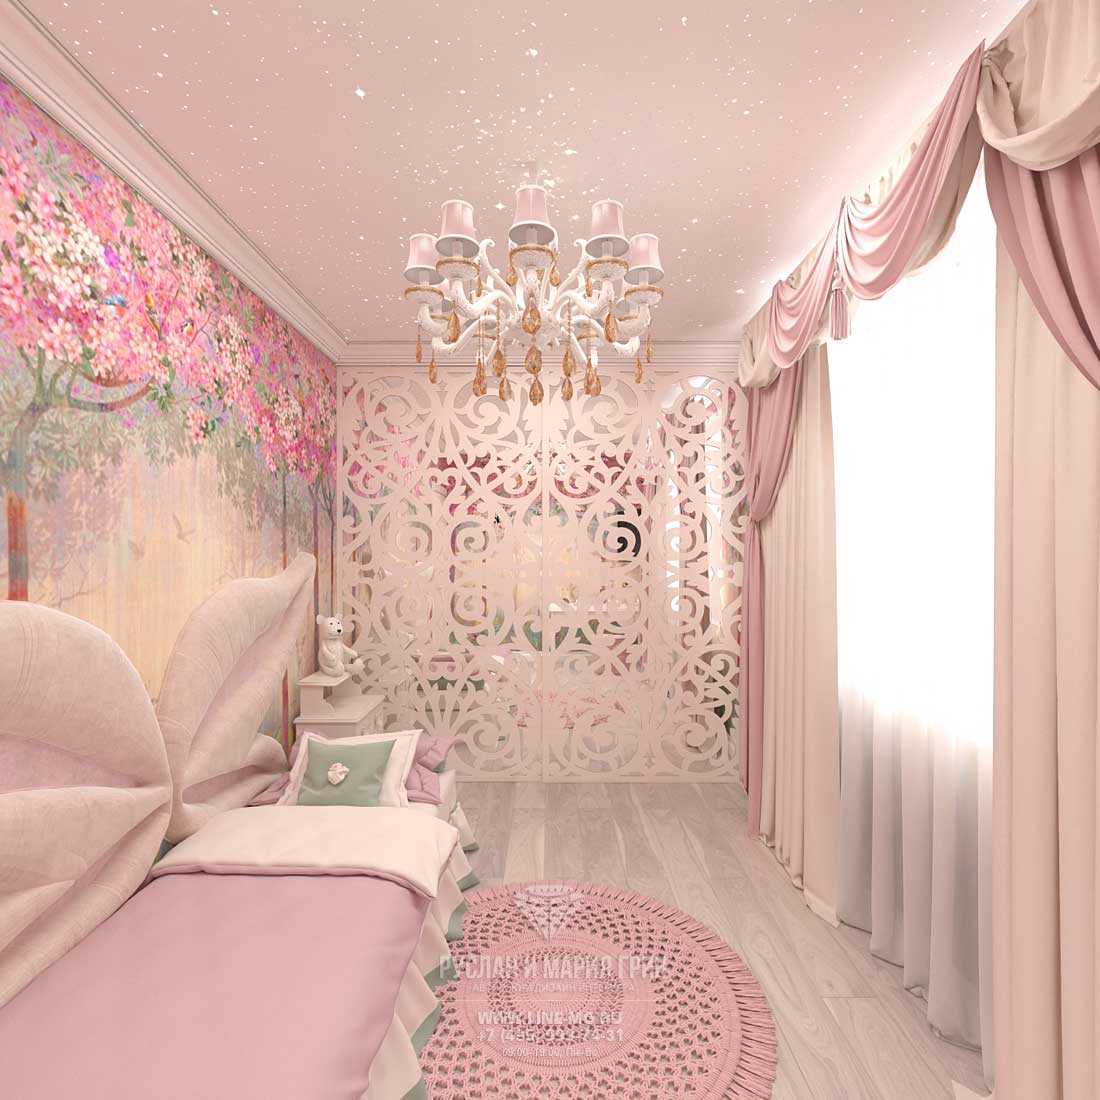 variant of the bright design of the room for the girl